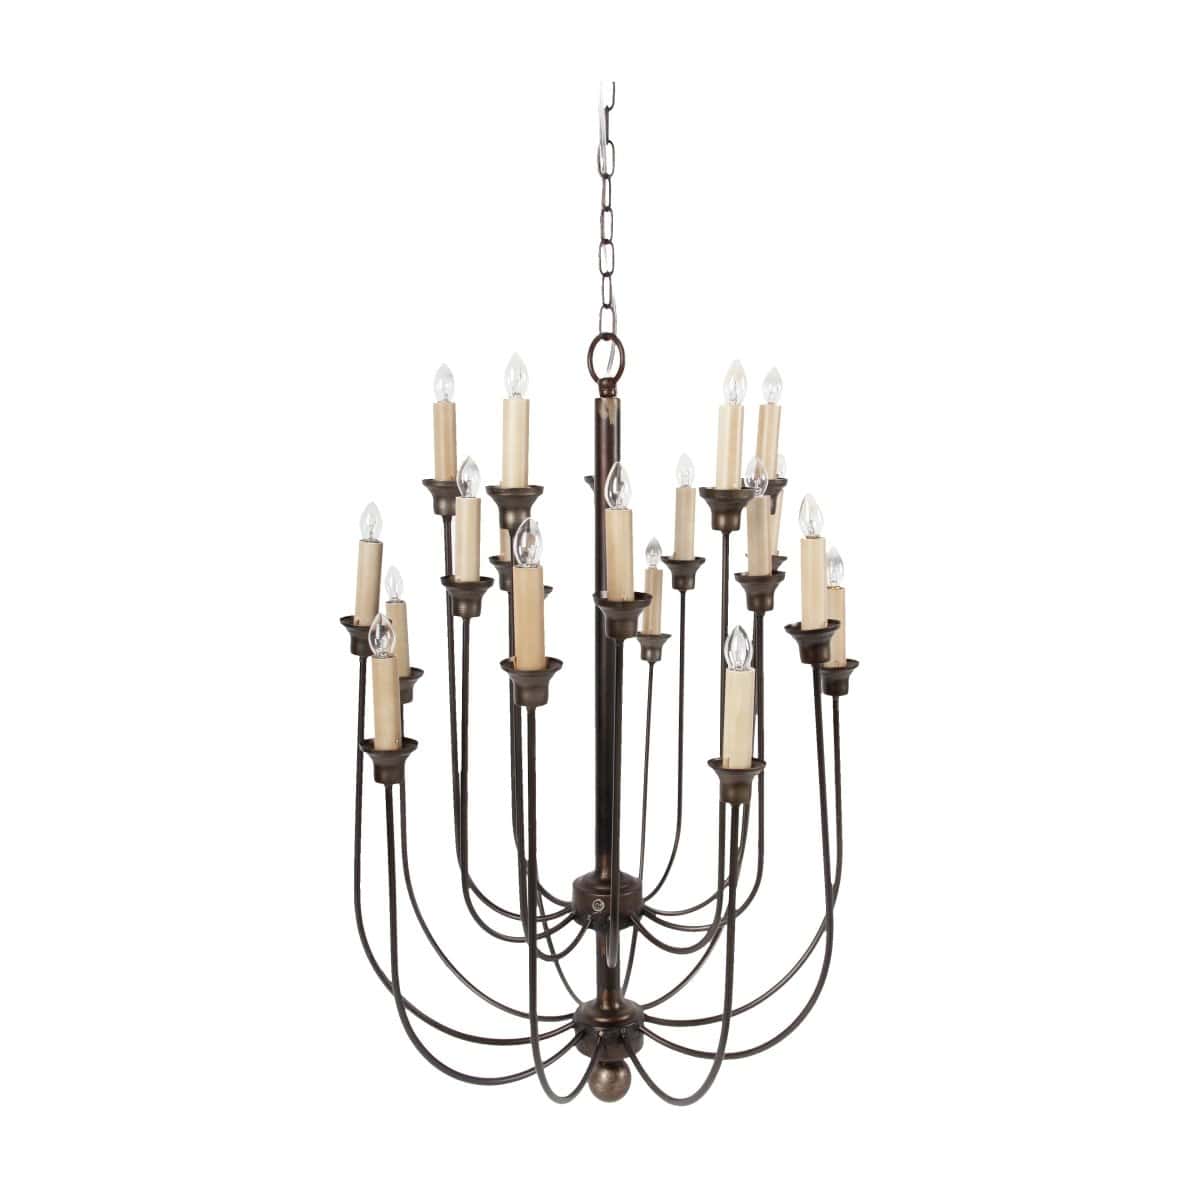 AB-37825  Langley 20-Light Chandelier picket and rail